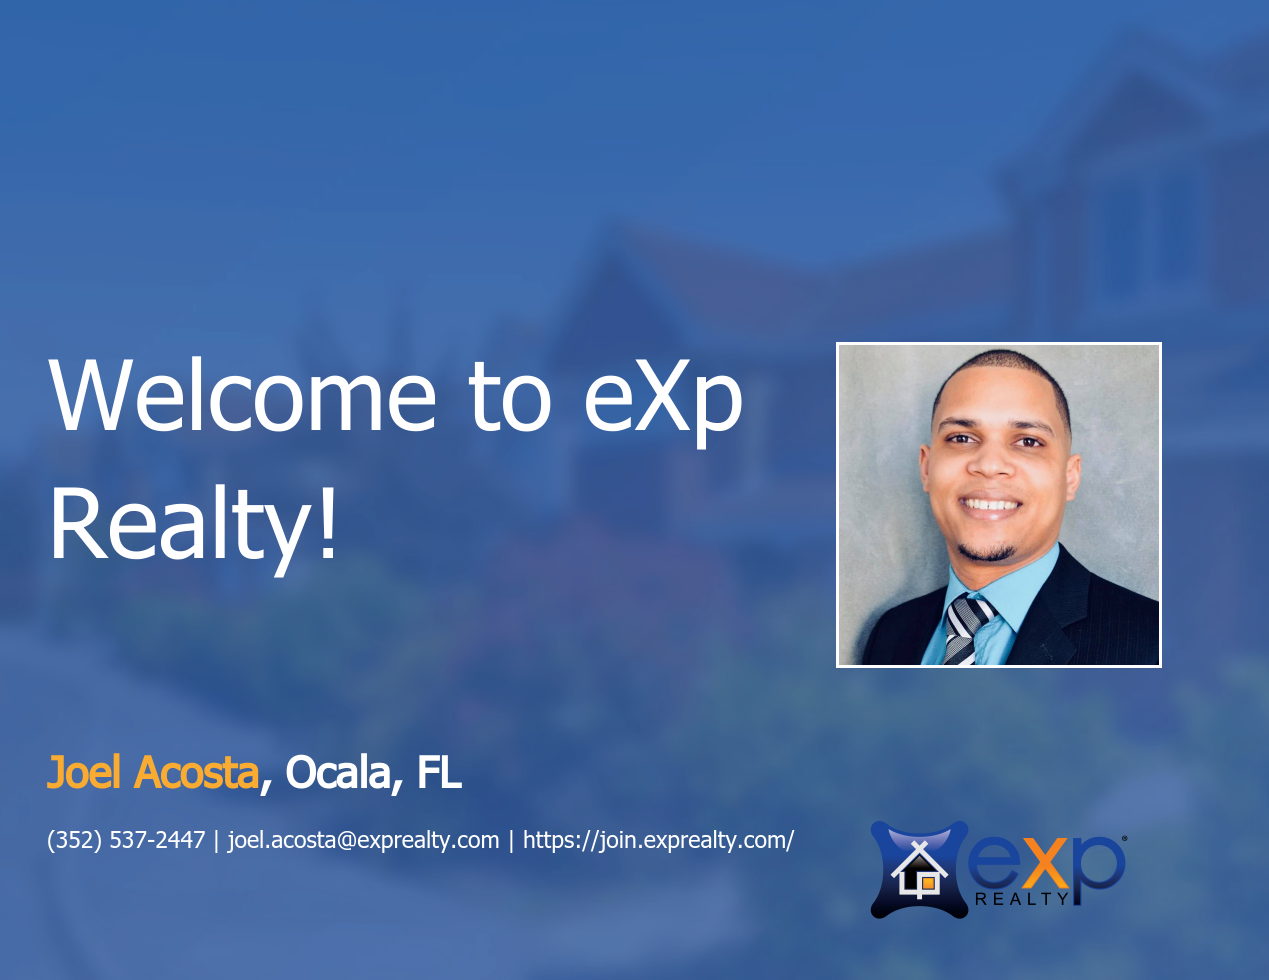 Welcome to eXp Realty Joel Acosta!